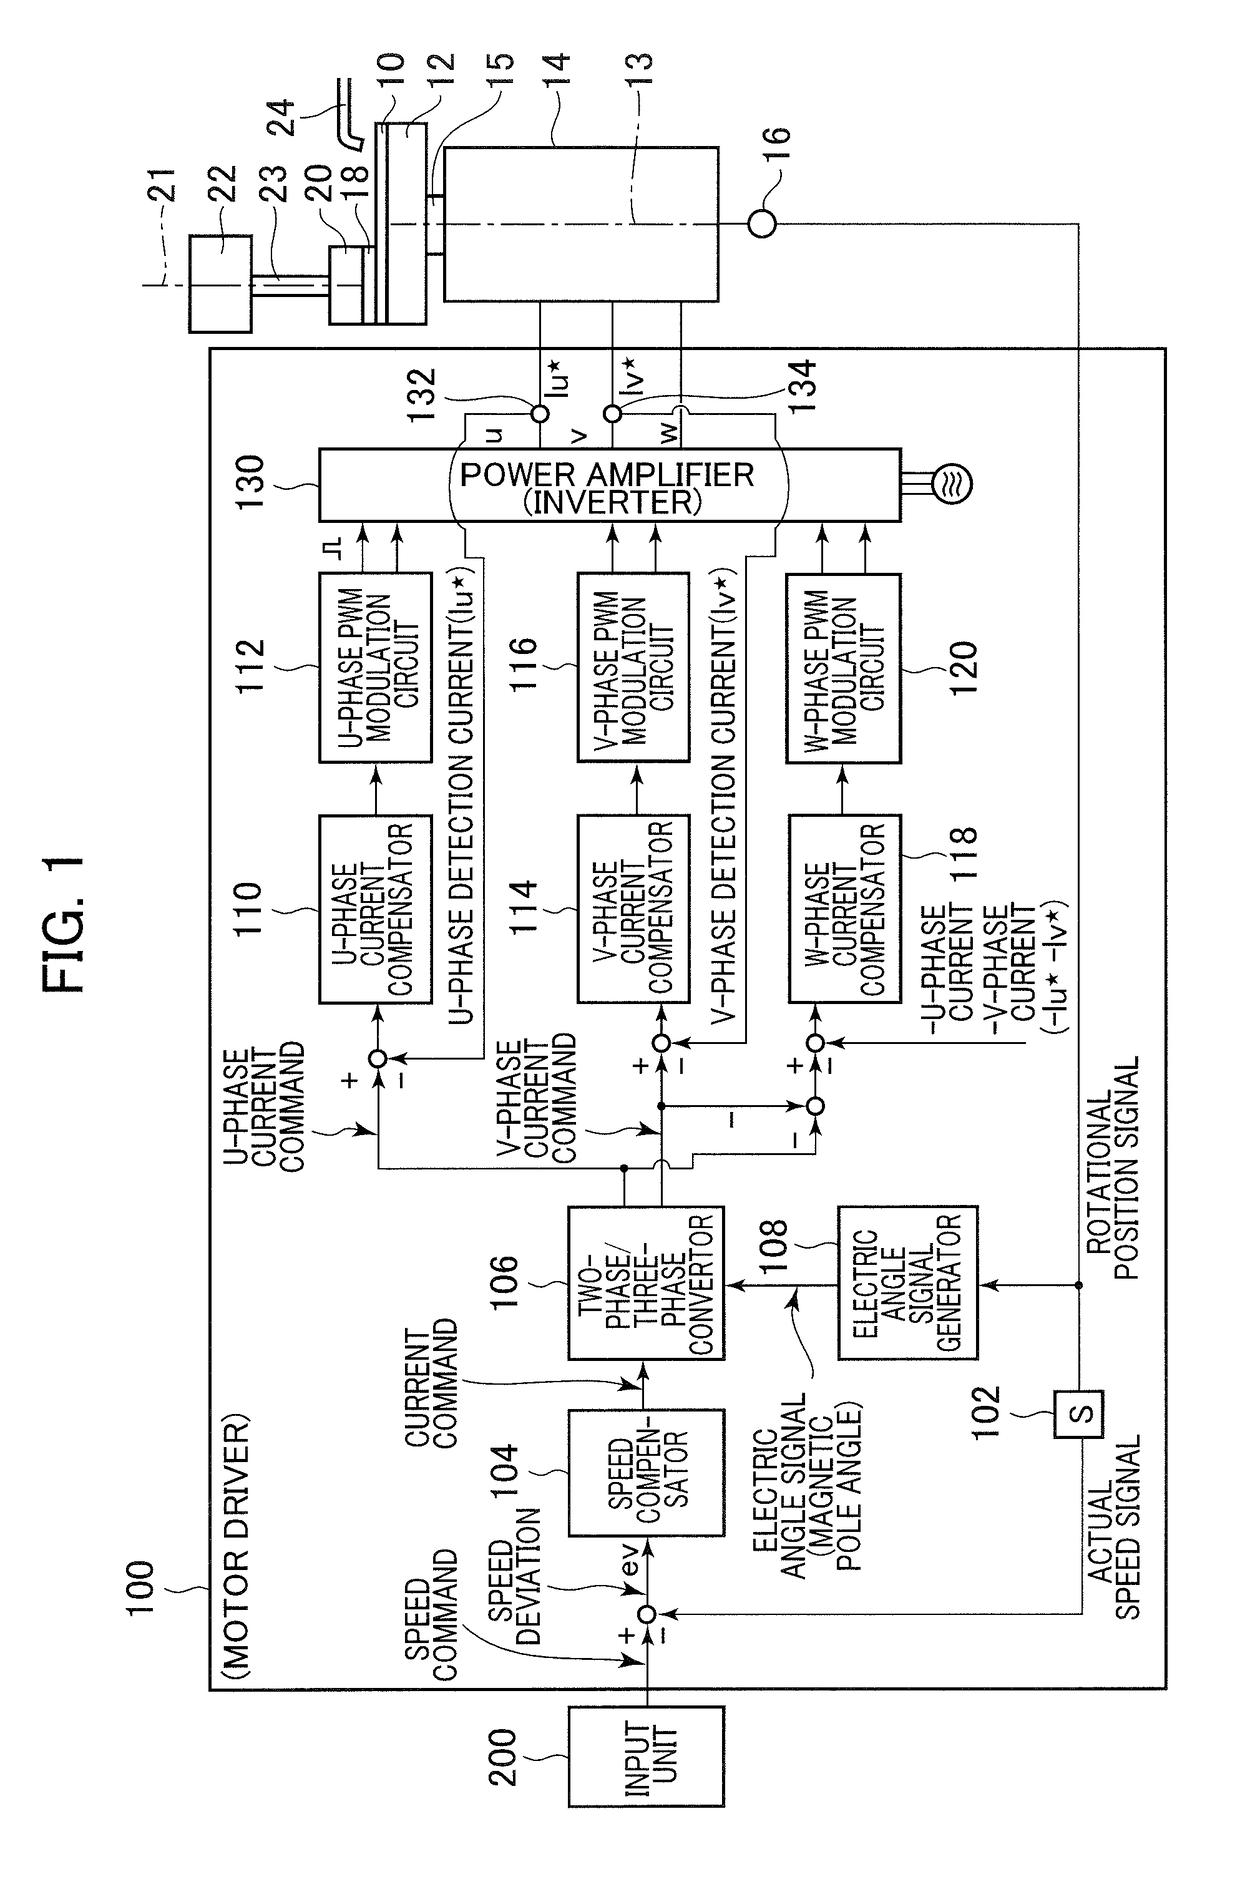 Polishing apparatus having end point detecting apparatus detecting polishing end point on basis of current and sliding friction